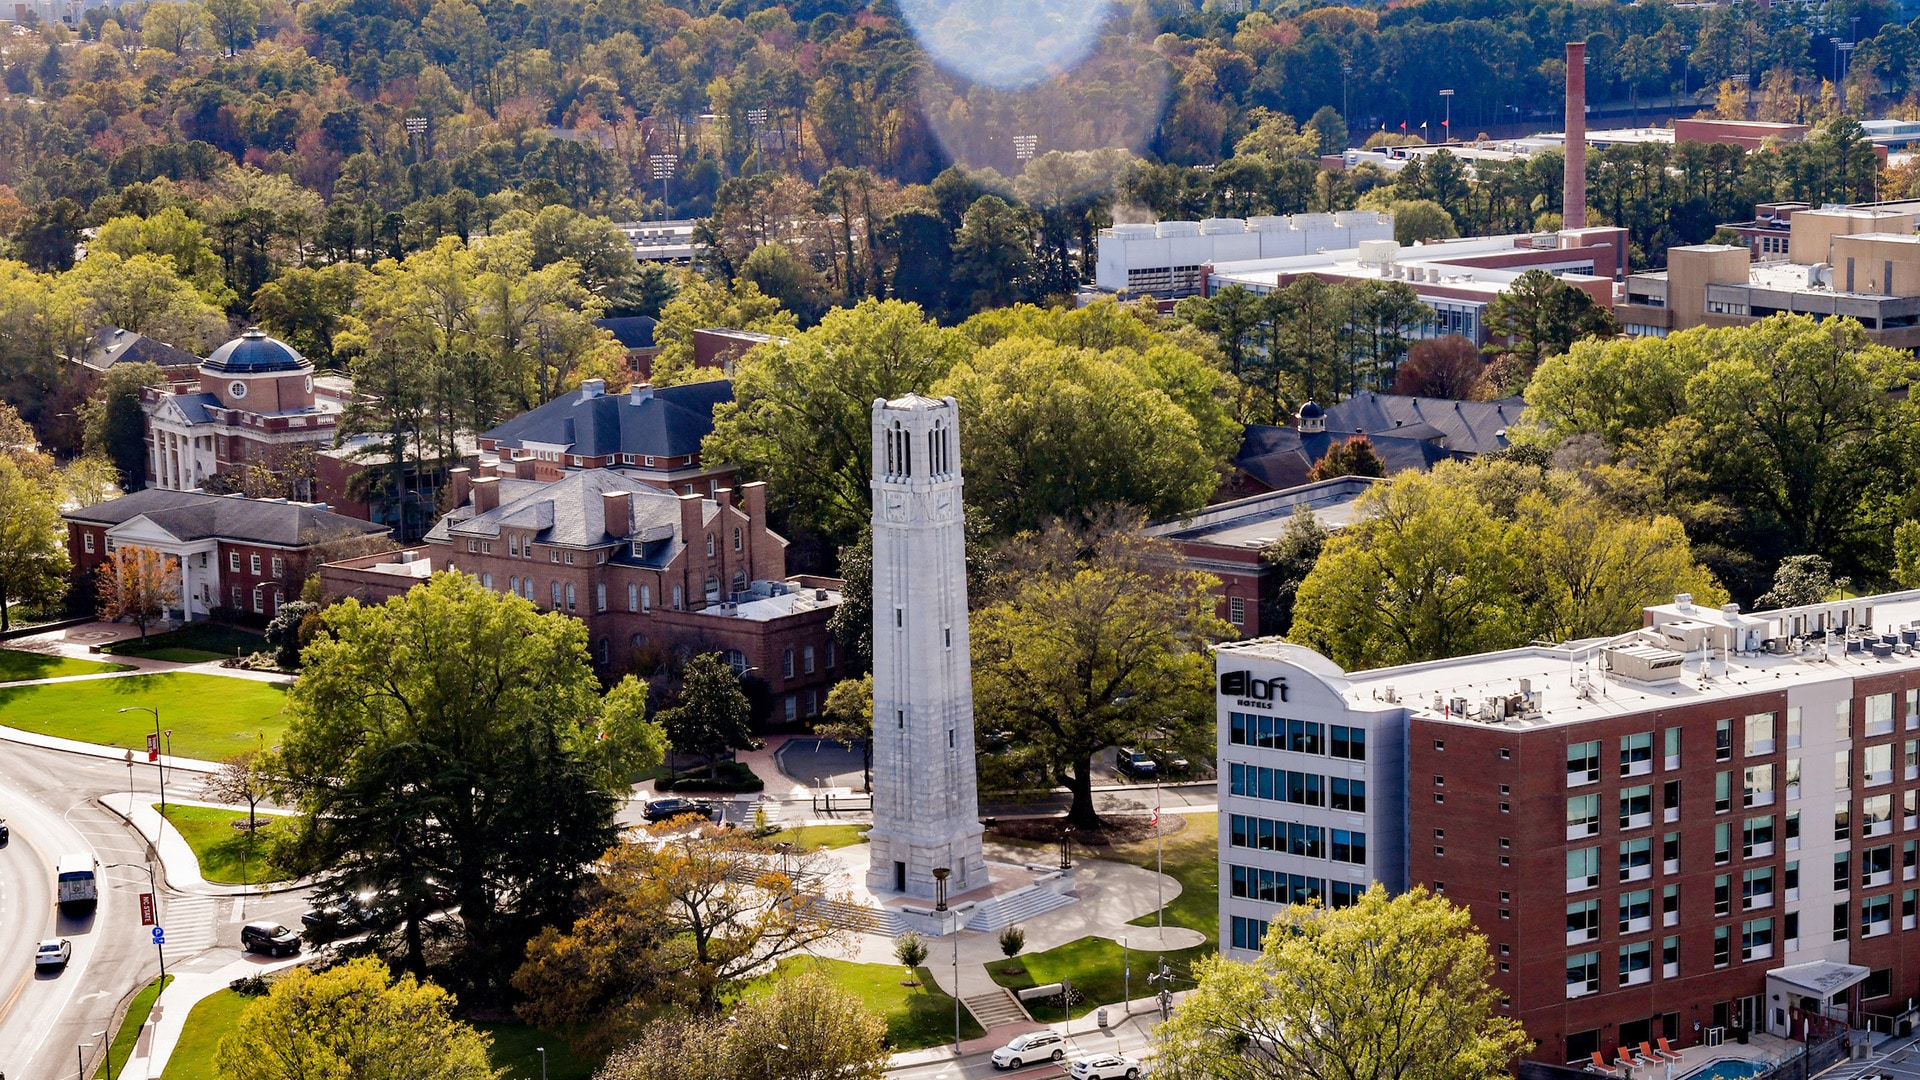 An aerial view of NC State's campus, showing the Belltower, Holladay Hall and the State College smokestack.